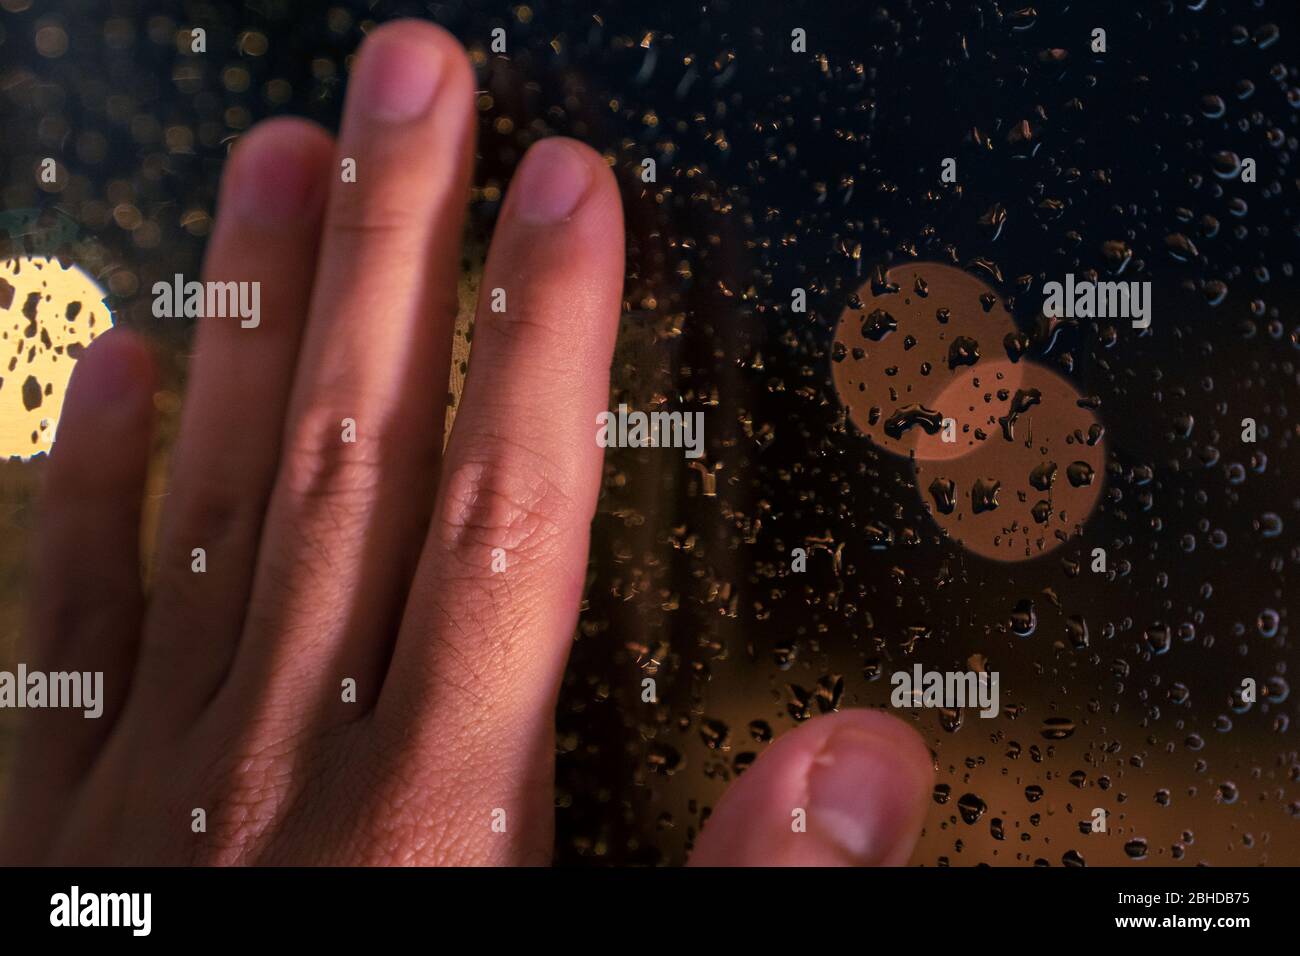 Hand resting on the window at night with the warm light of the street lamps and with drops of water from a rainy day. Sad image of melancholy looking Stock Photo